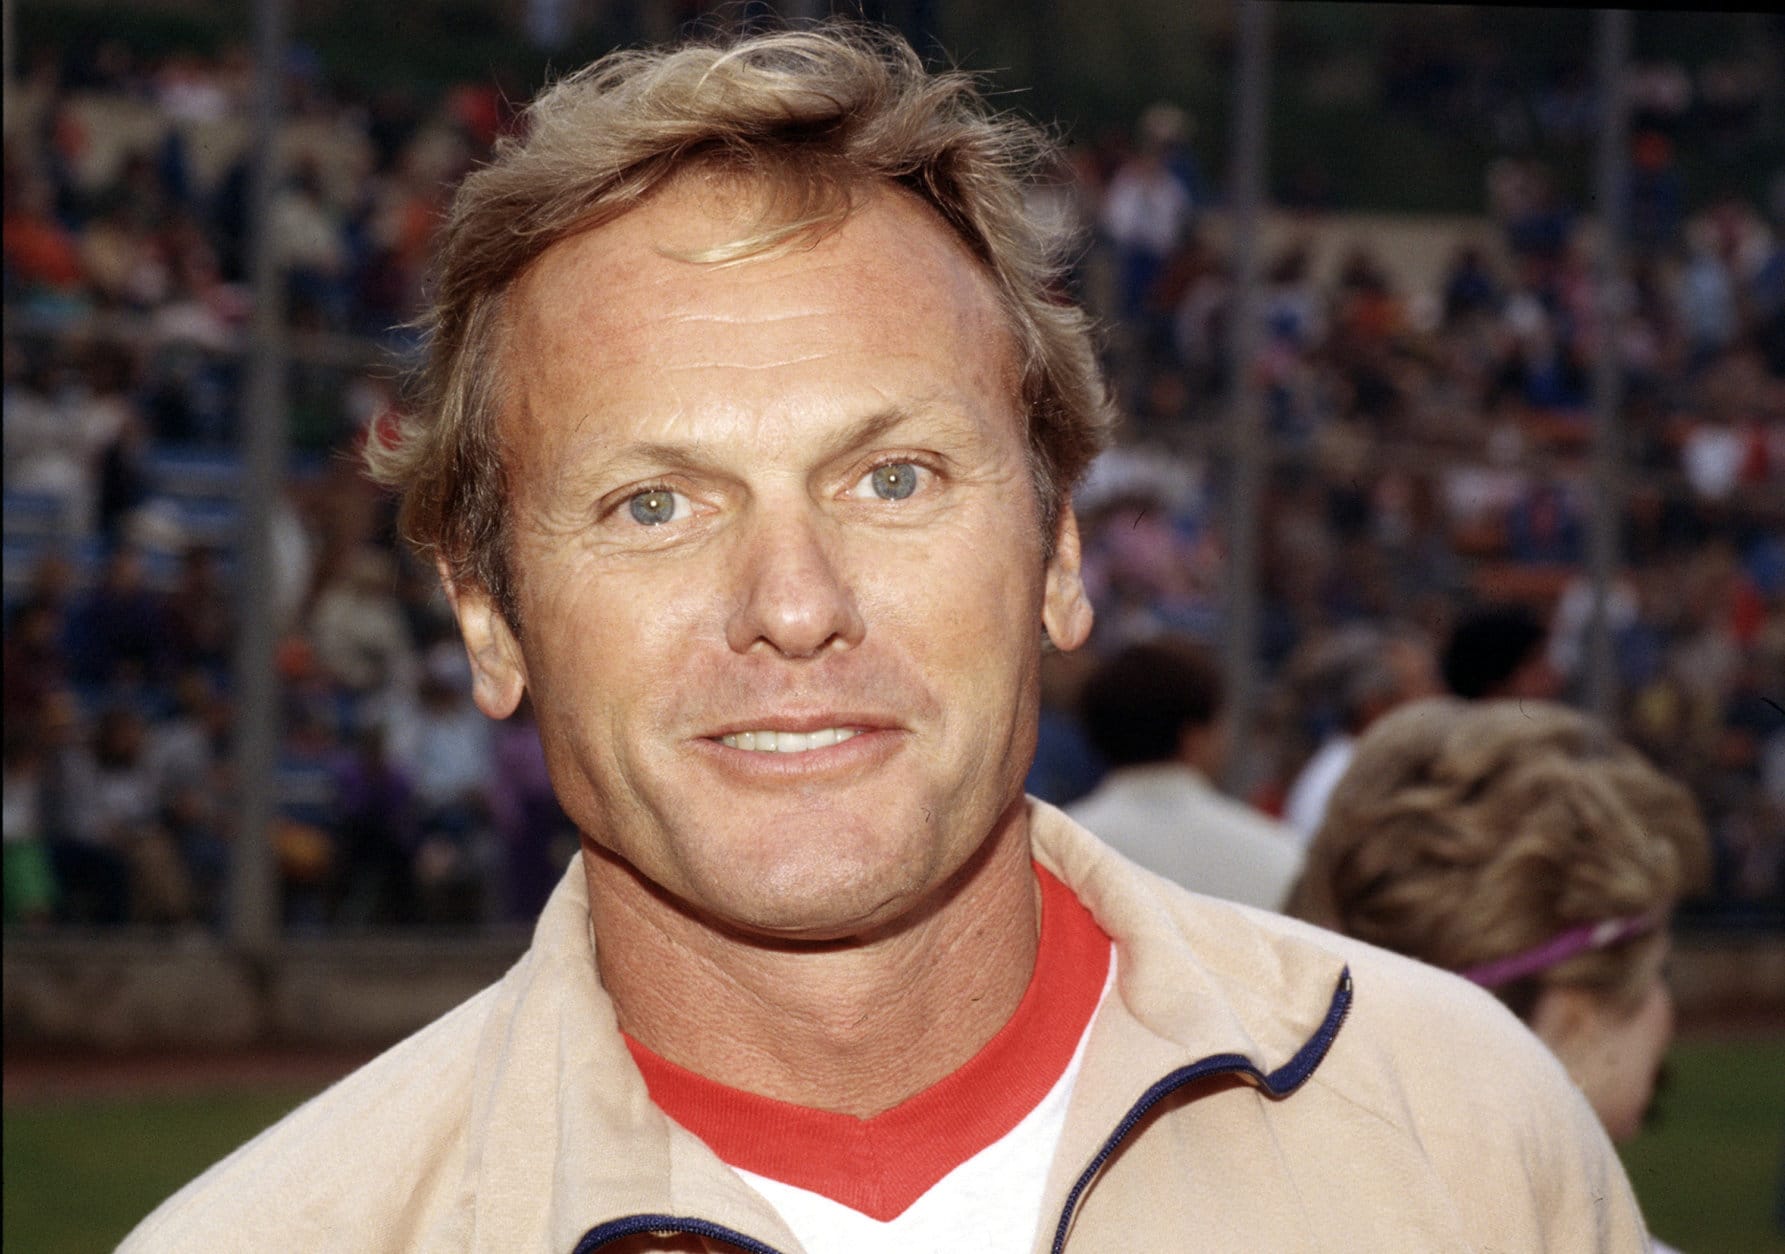 Actor Tab Hunter is shown in this undated photo.  (AP Photo)